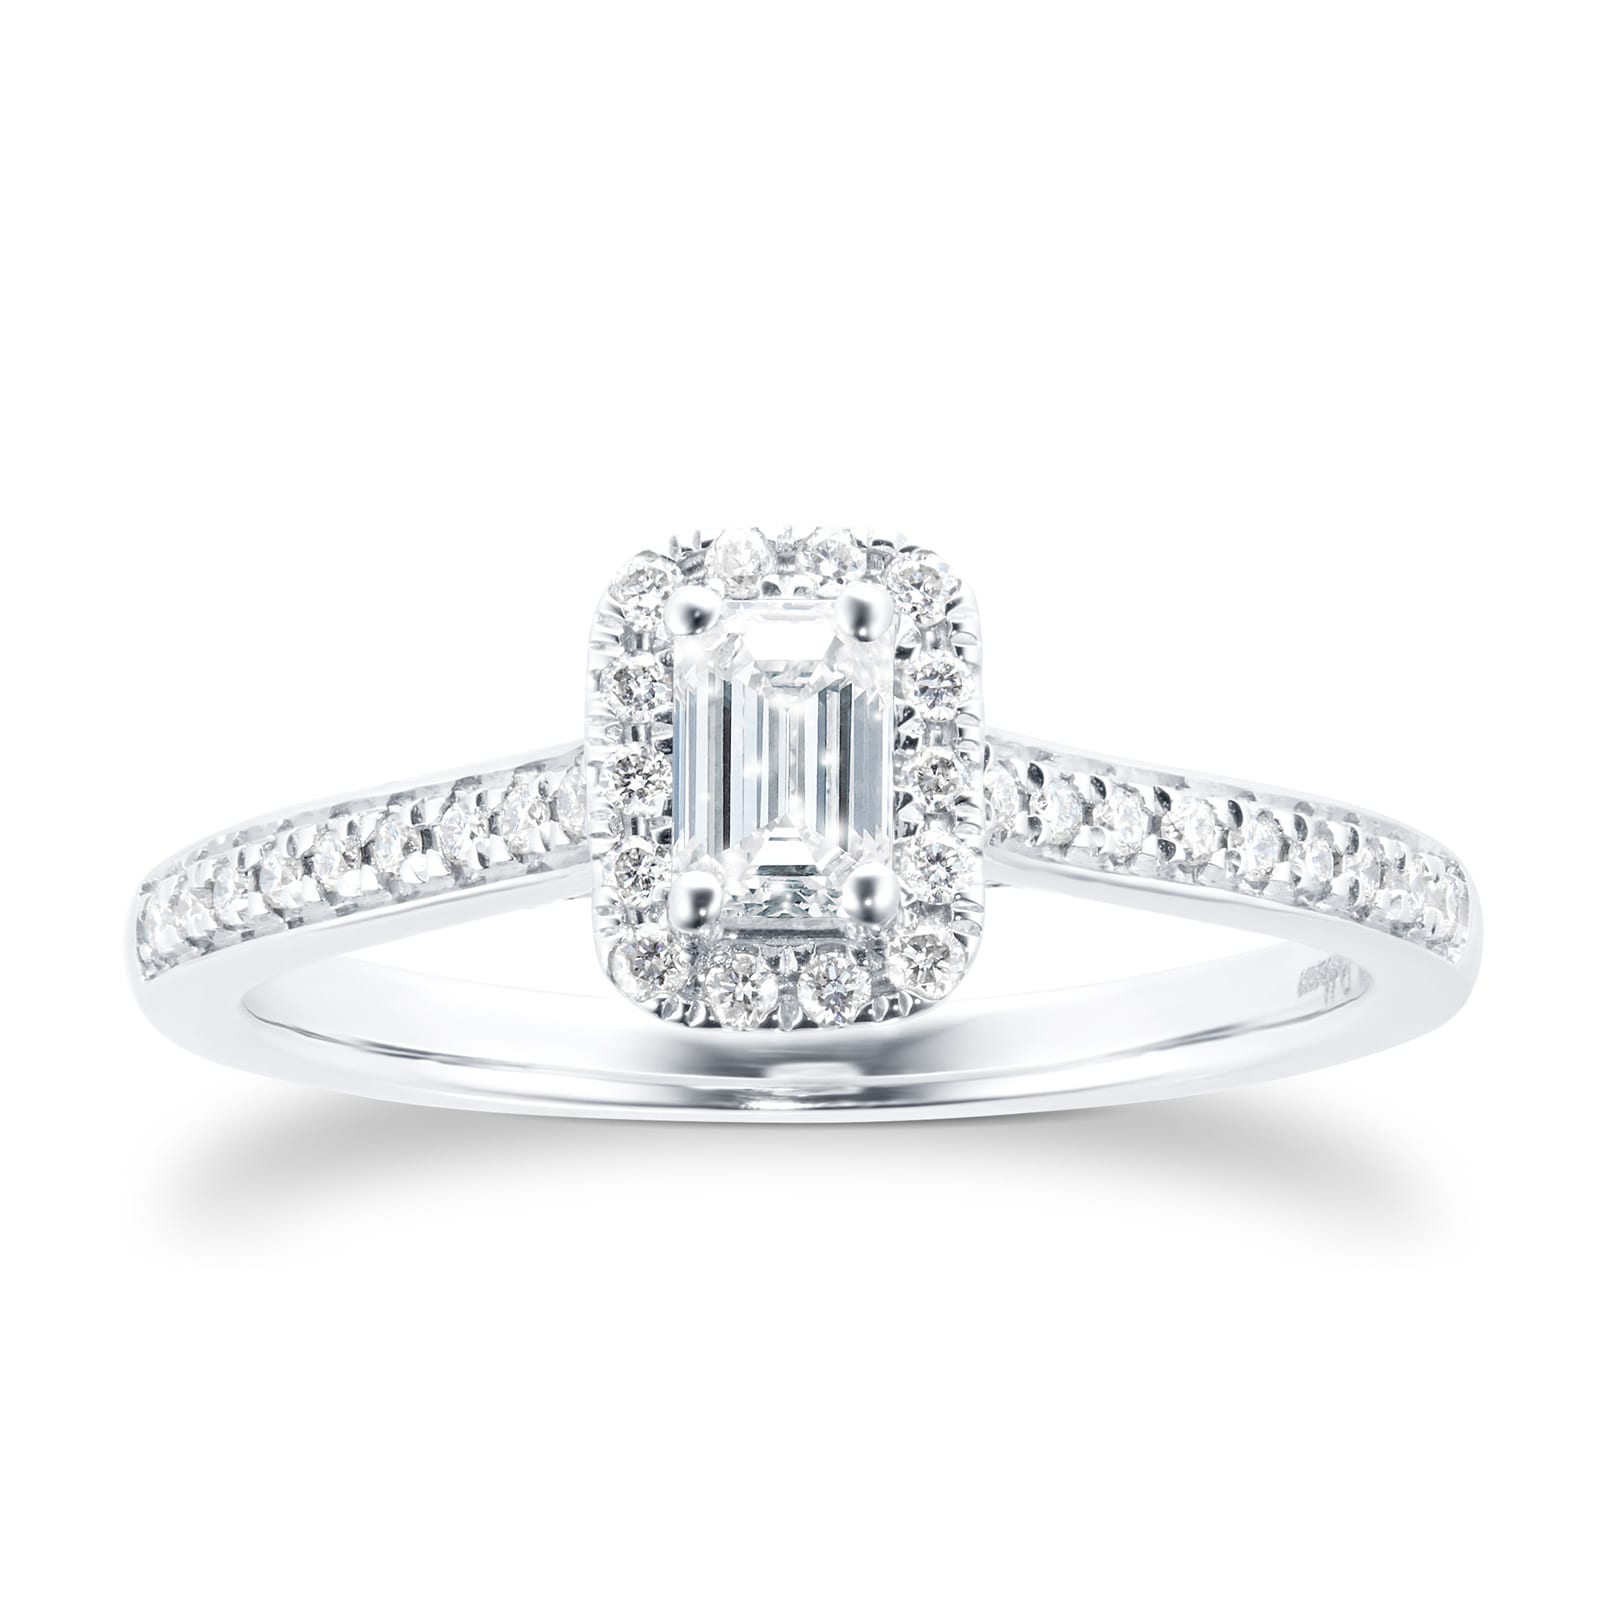 Emerald Cut 0.50ct Halo Diamond Ring In 18ct White Gold - Ring Size K